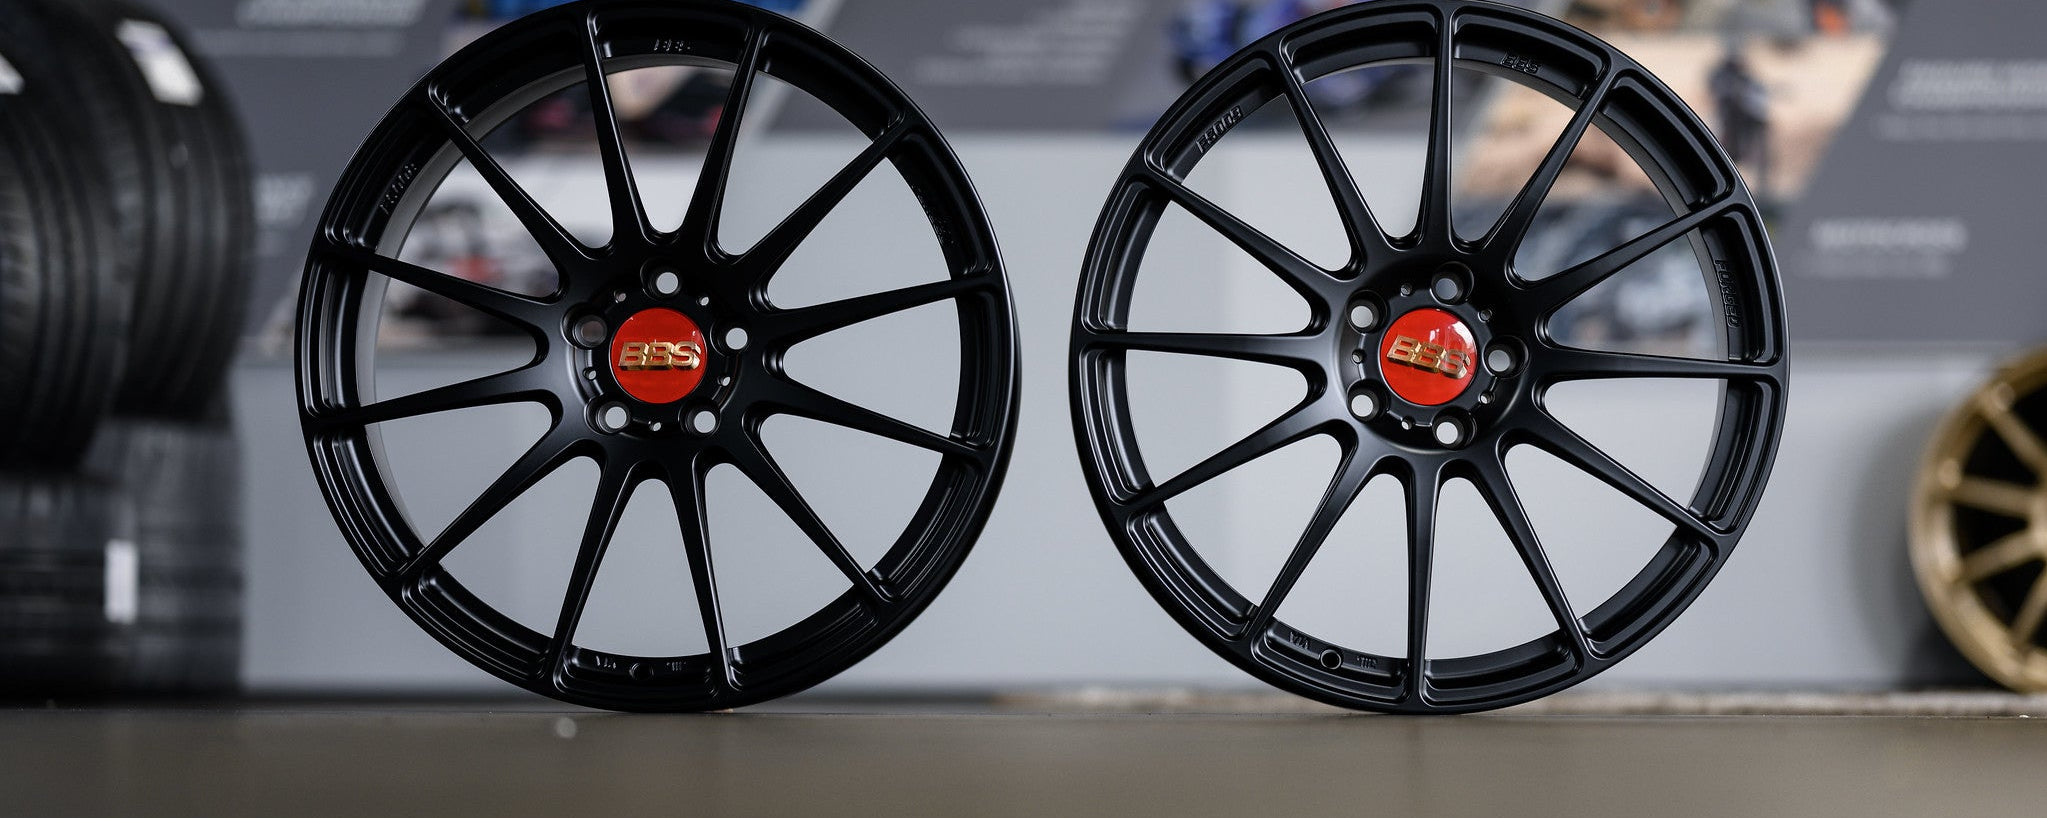 BBS FS - Premium Wheels from BBS Japan - From just $6290.00! Shop now at MK MOTORSPORTS